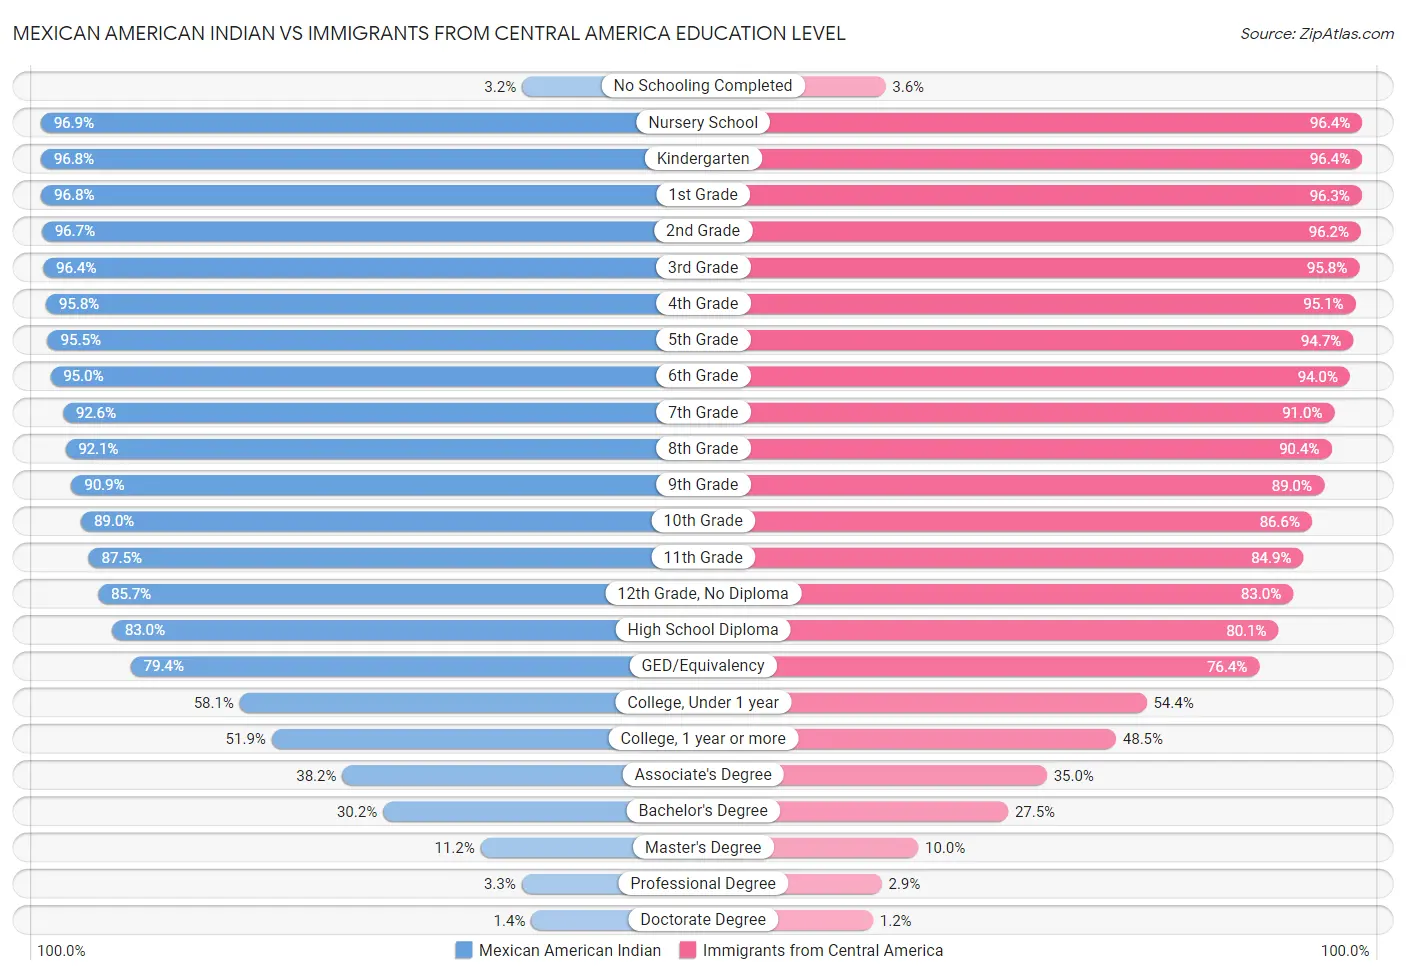 Mexican American Indian vs Immigrants from Central America Education Level